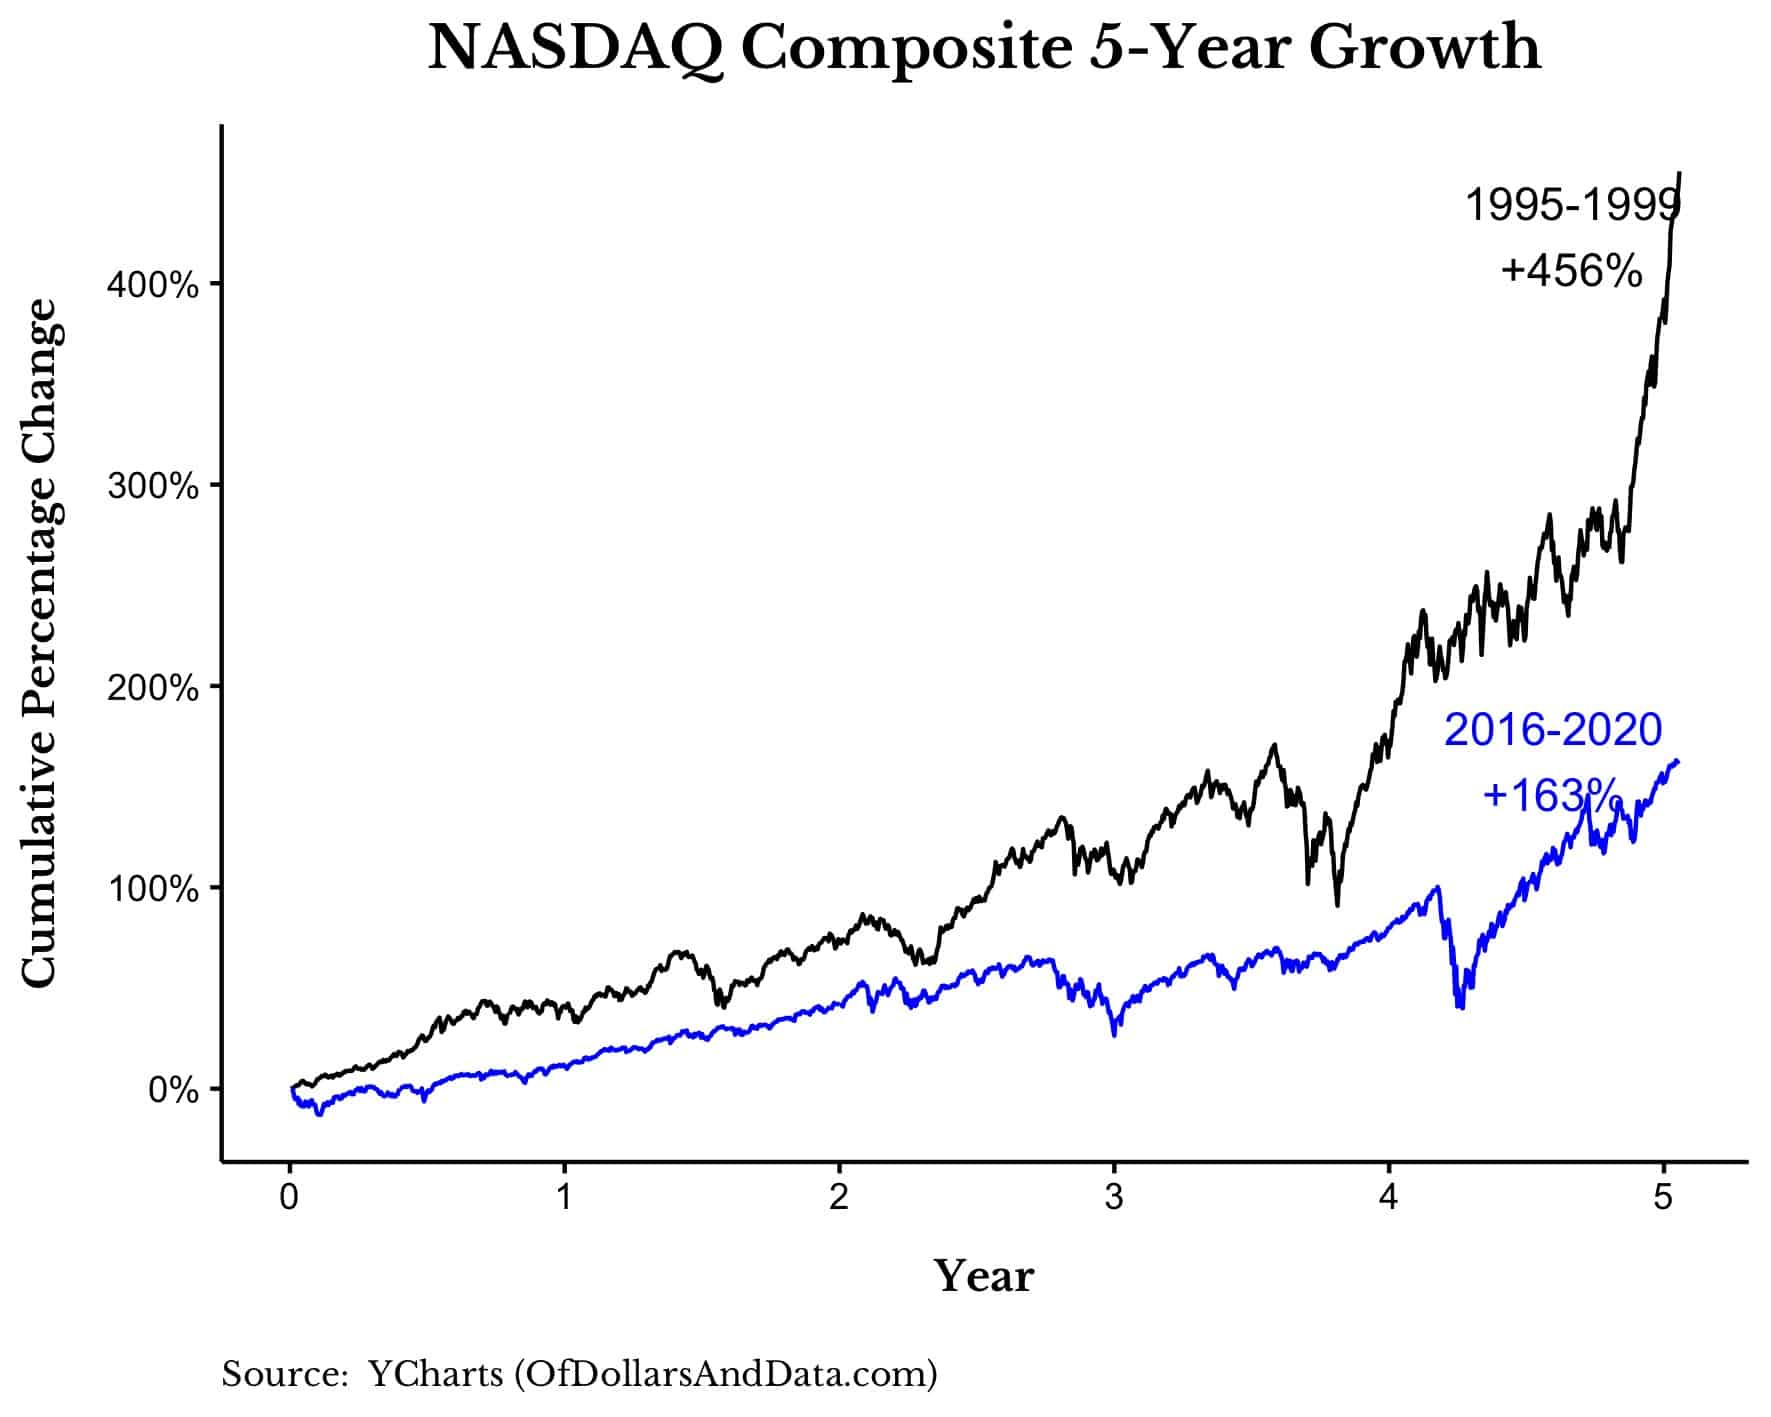 NASDAQ 5-year growth for 1995-1999 and 2016-2020